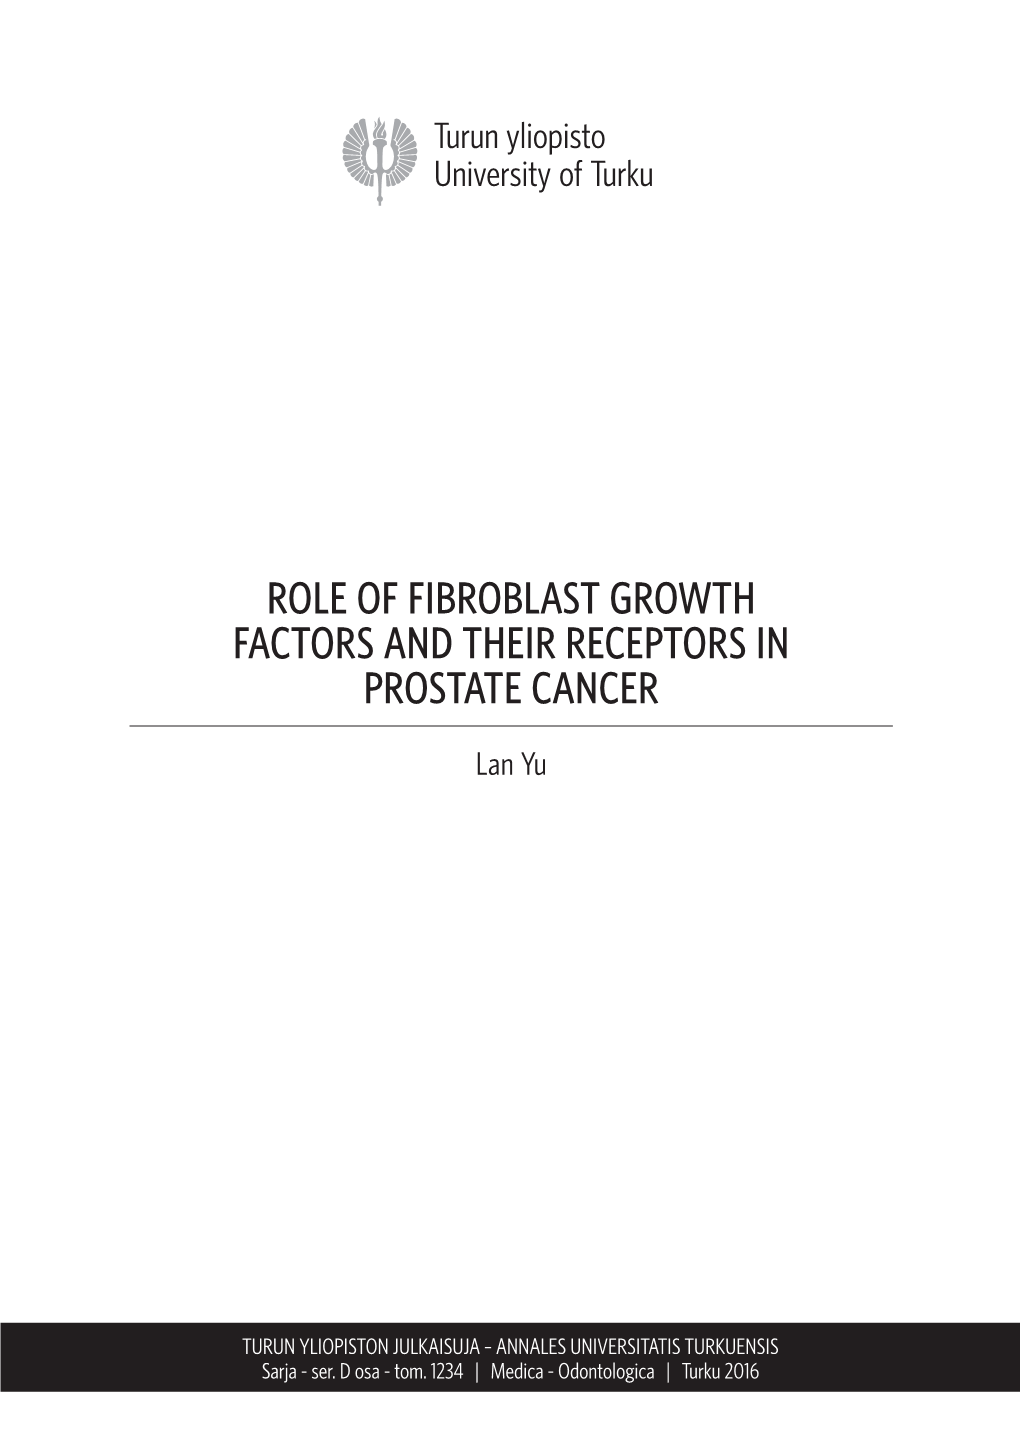 Role of Fibroblast Growth Factors and Their Receptors in Prostate Cancer